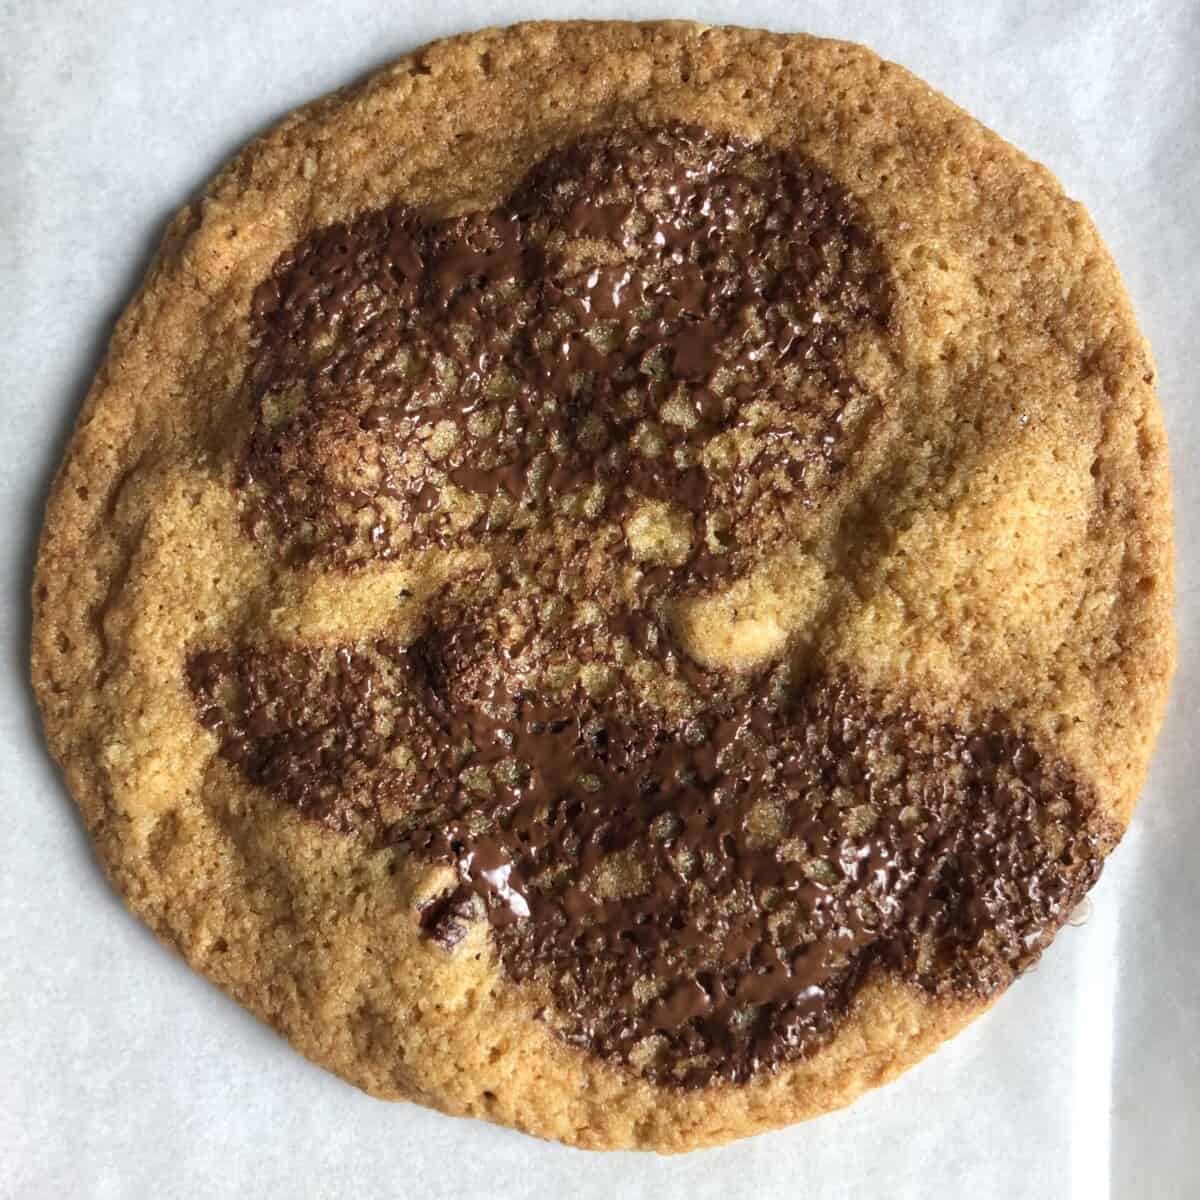 Un-chilled dough baked chocolate chip pecan cookie very thin, soft, and chewy with large spread